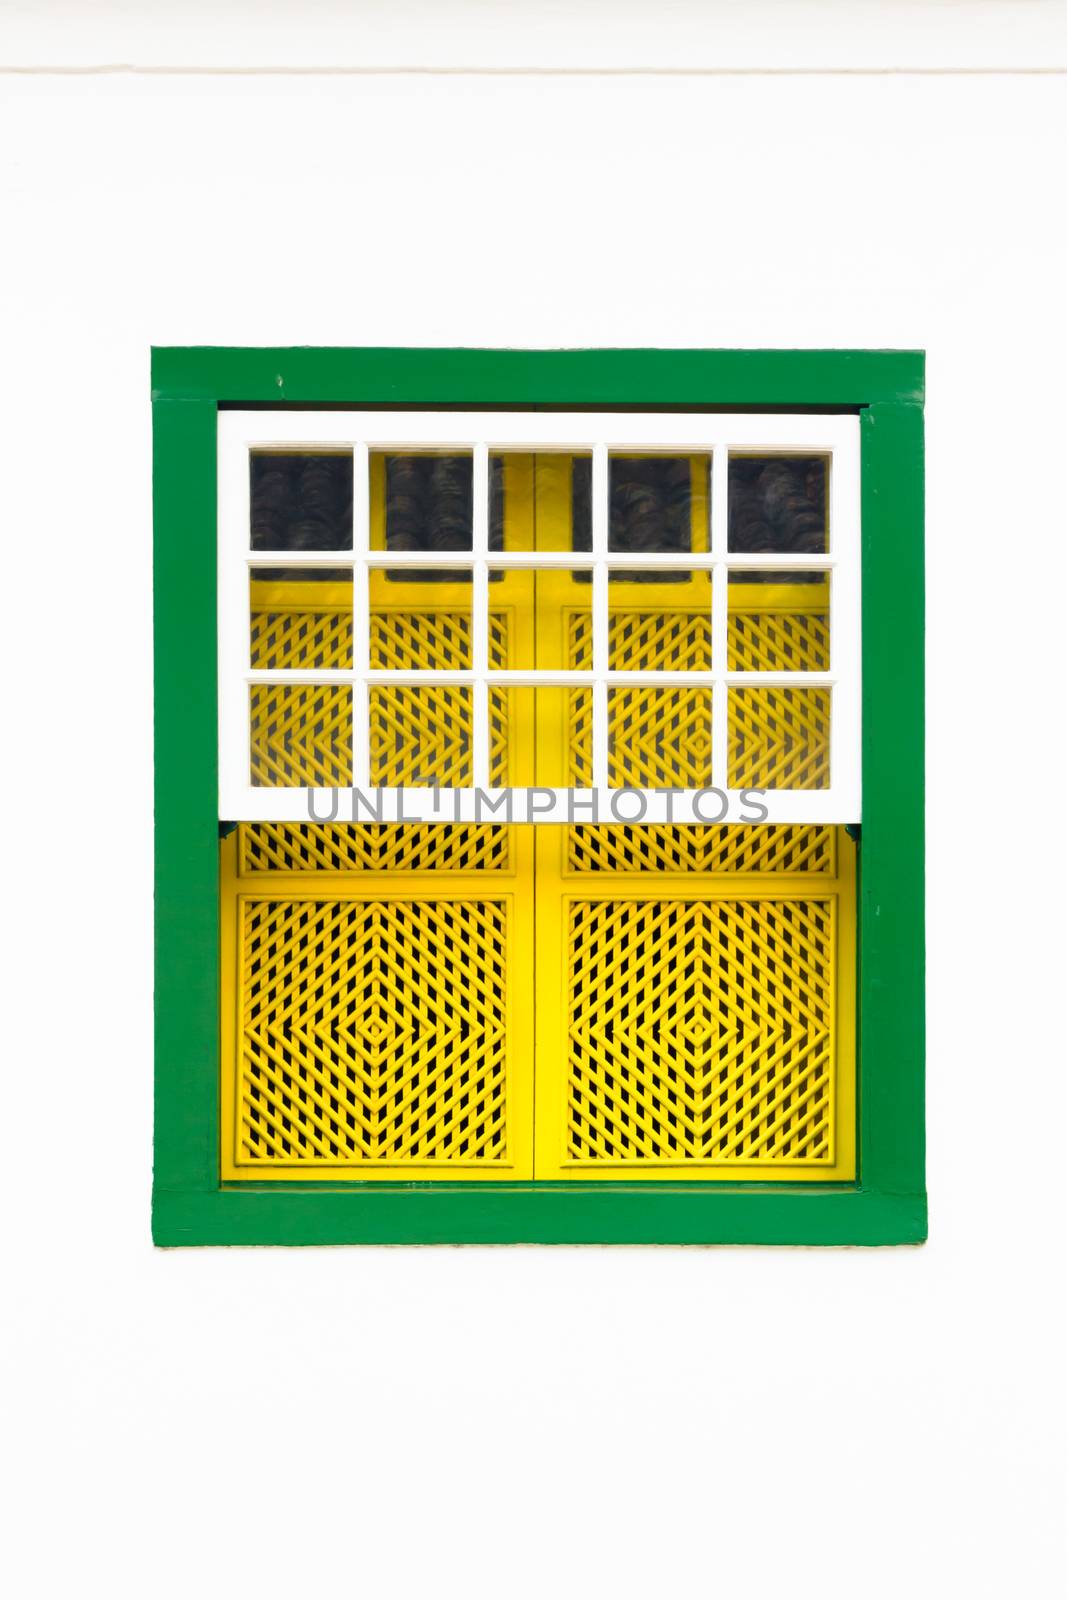 Decorative, colonial, green yellow, vintage, window on a white wall in Paraty (or Parati), Brazil.